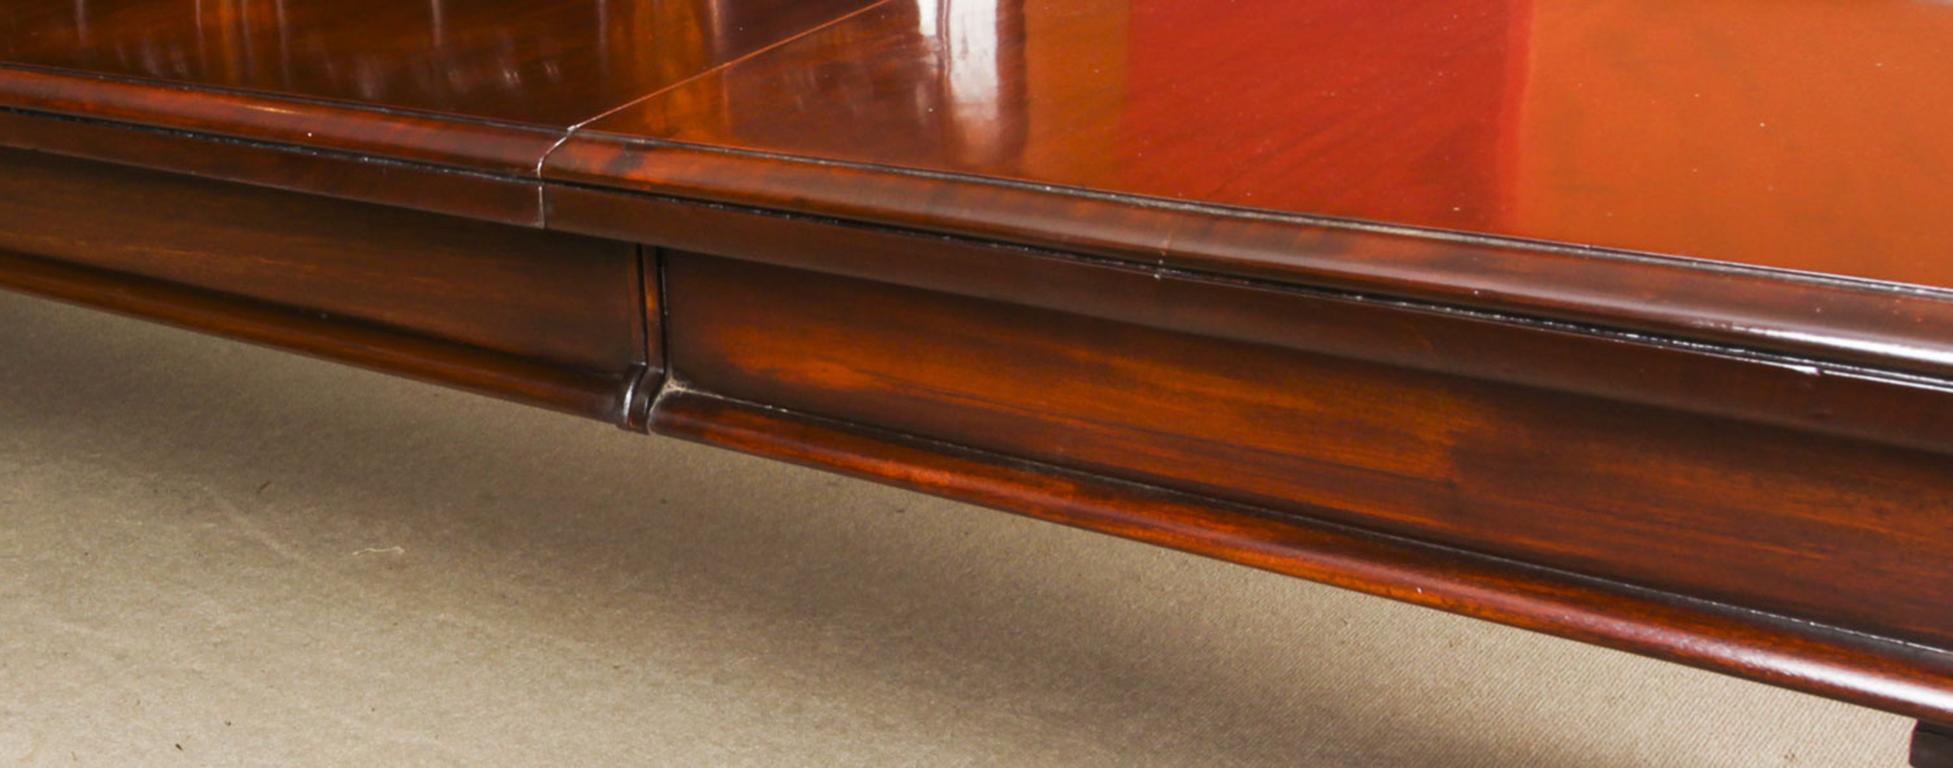 Antique William IV Flame Mahogany Extending Dining Table 19th C 15